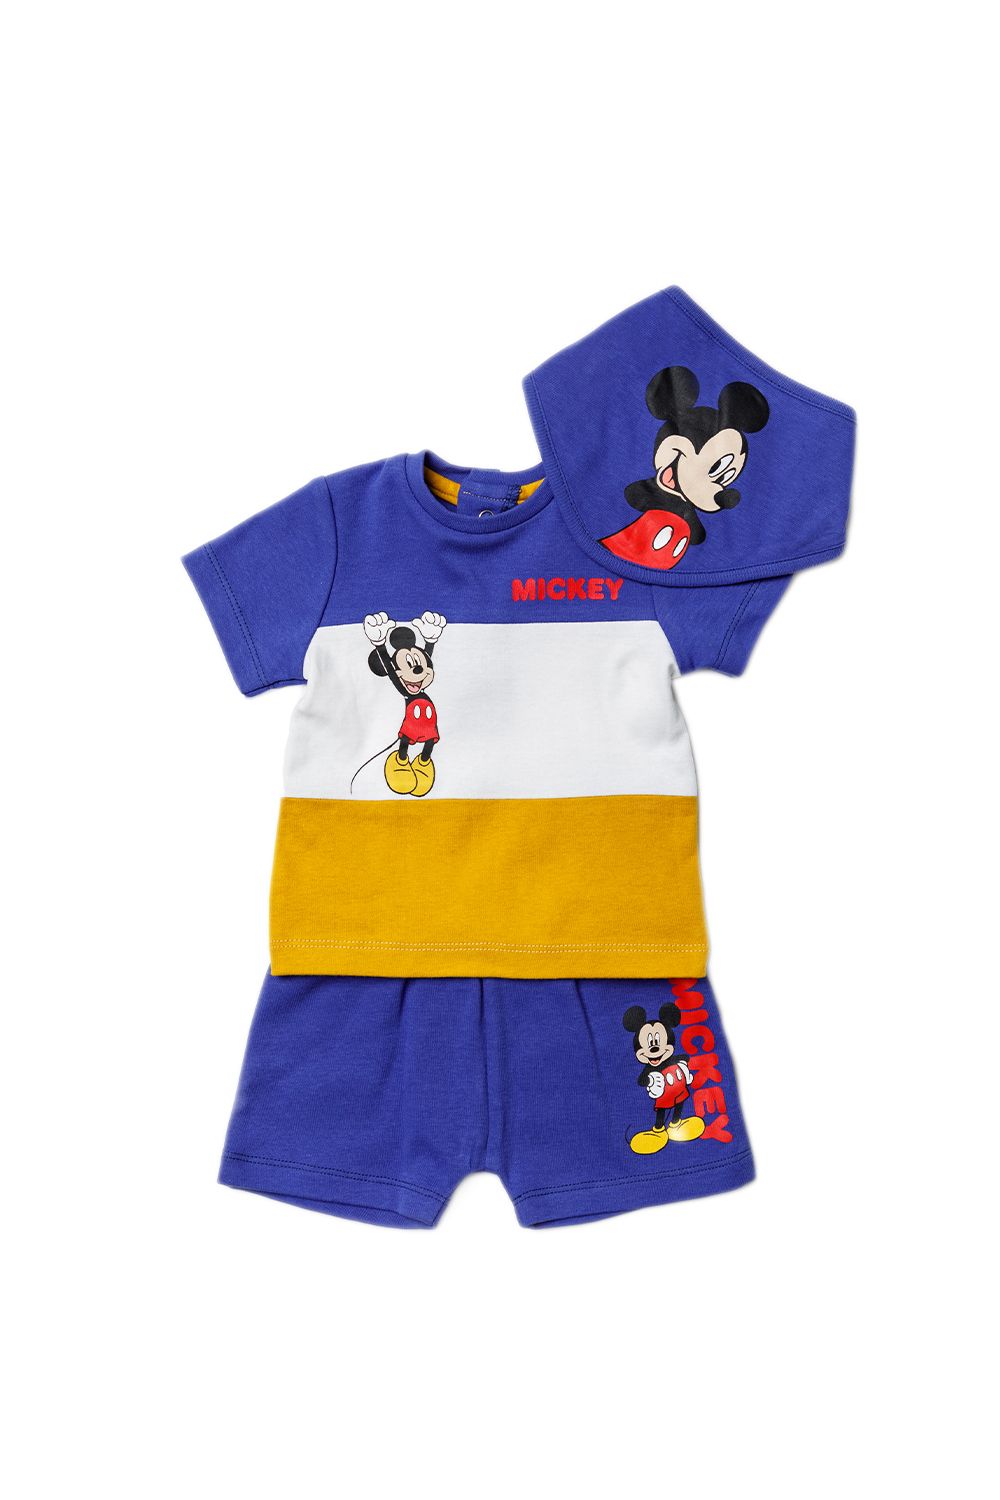 This adorable Disney Baby three-piece set features a vibrant Mickey Mouse print. The set includes a printed t-shirt, a pair of shorts and a matching bib! The t-shirt, shorts and bib are all cotton, keeping your little one comfortable. This set would make a lovely gift or a new addition to your little ones wardrobe!